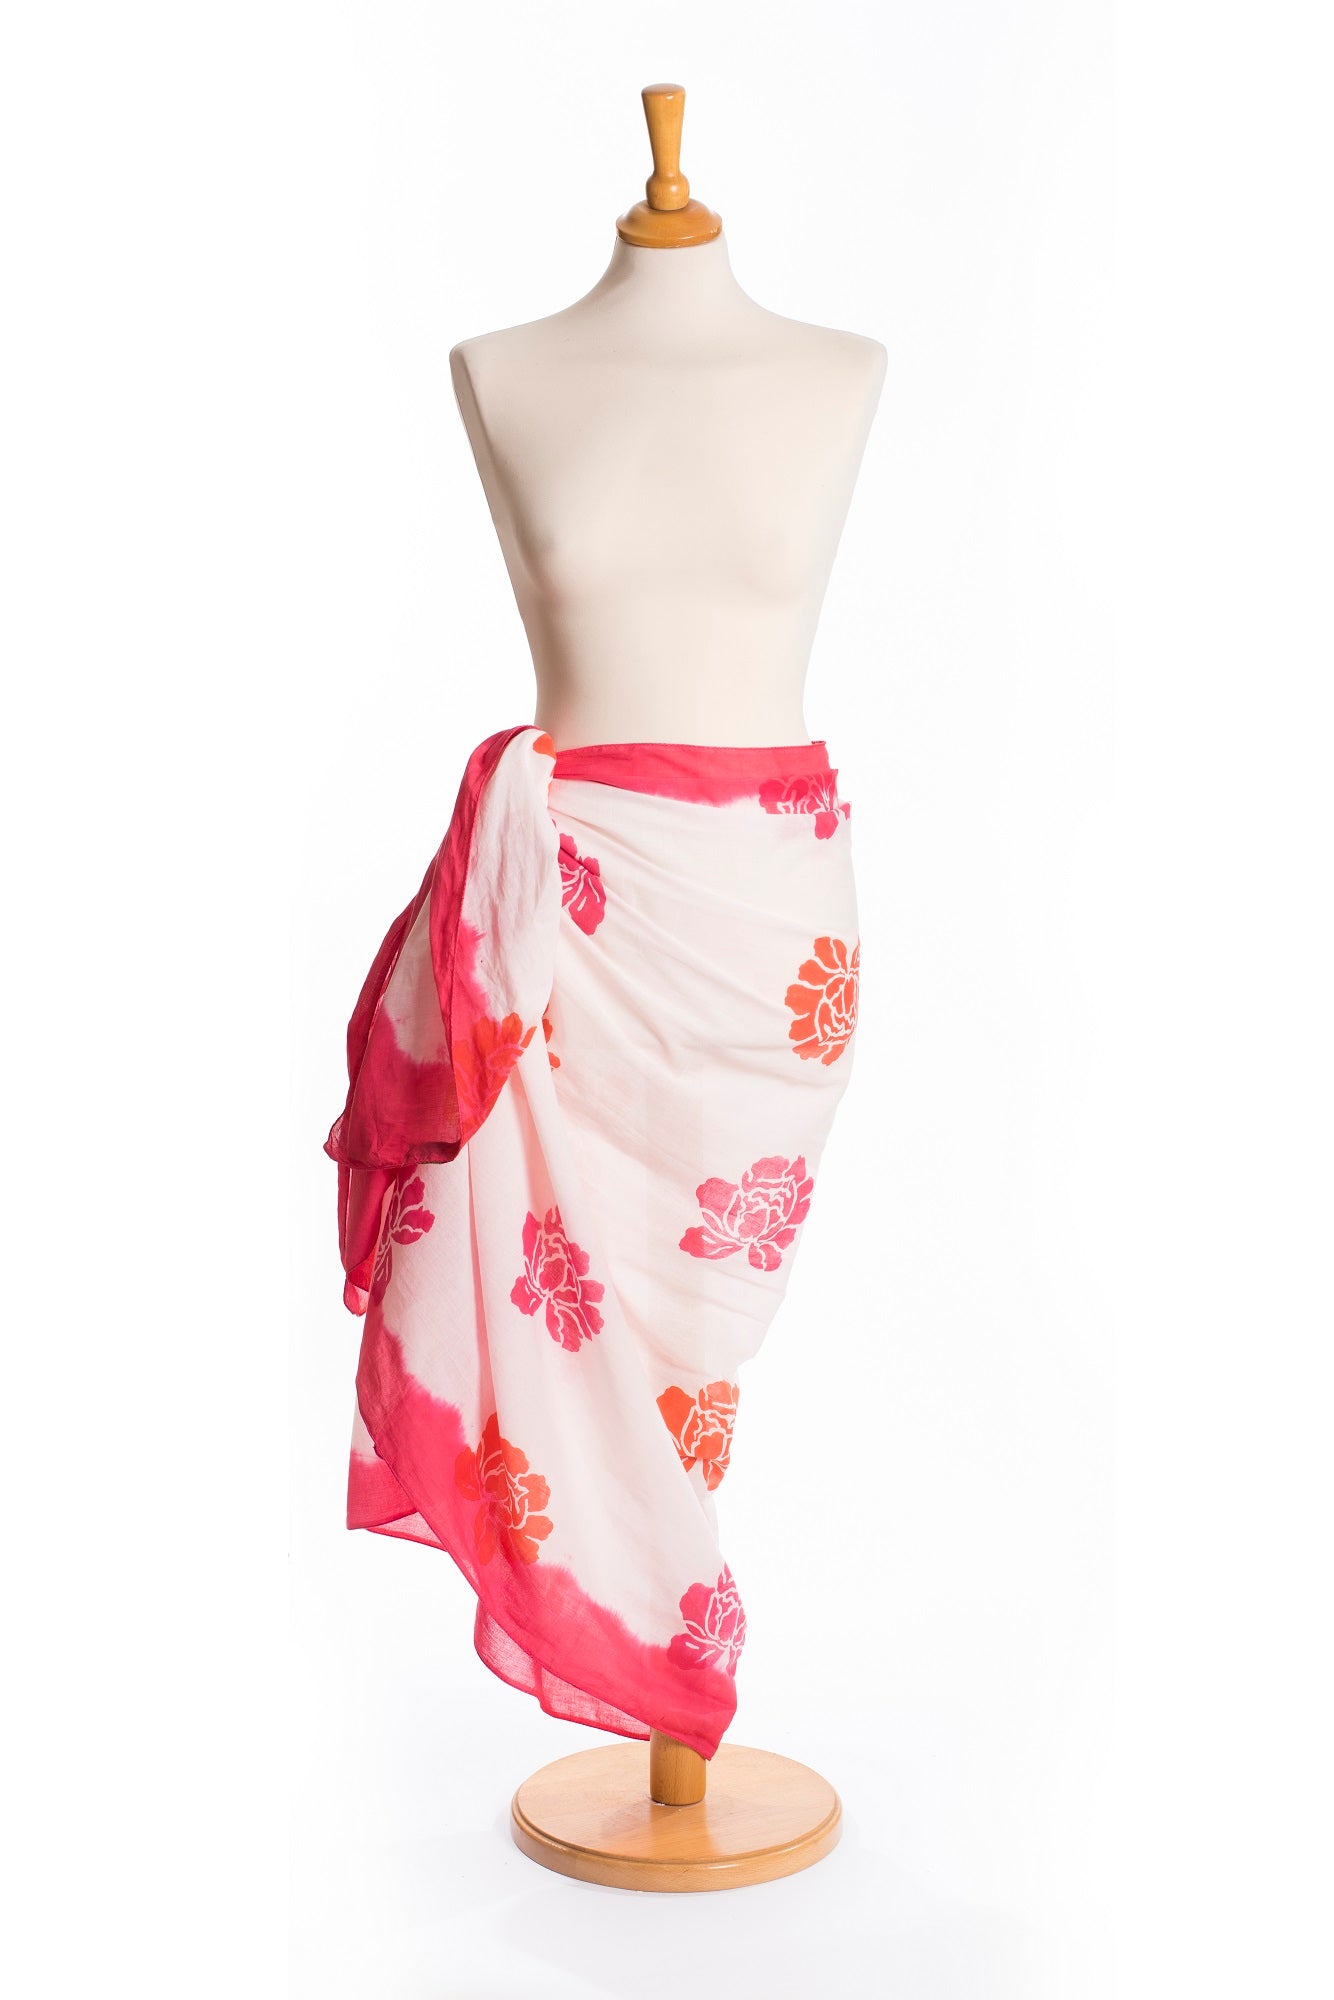 Sarong Pareo in Cotton Block Printing Technique - PINK